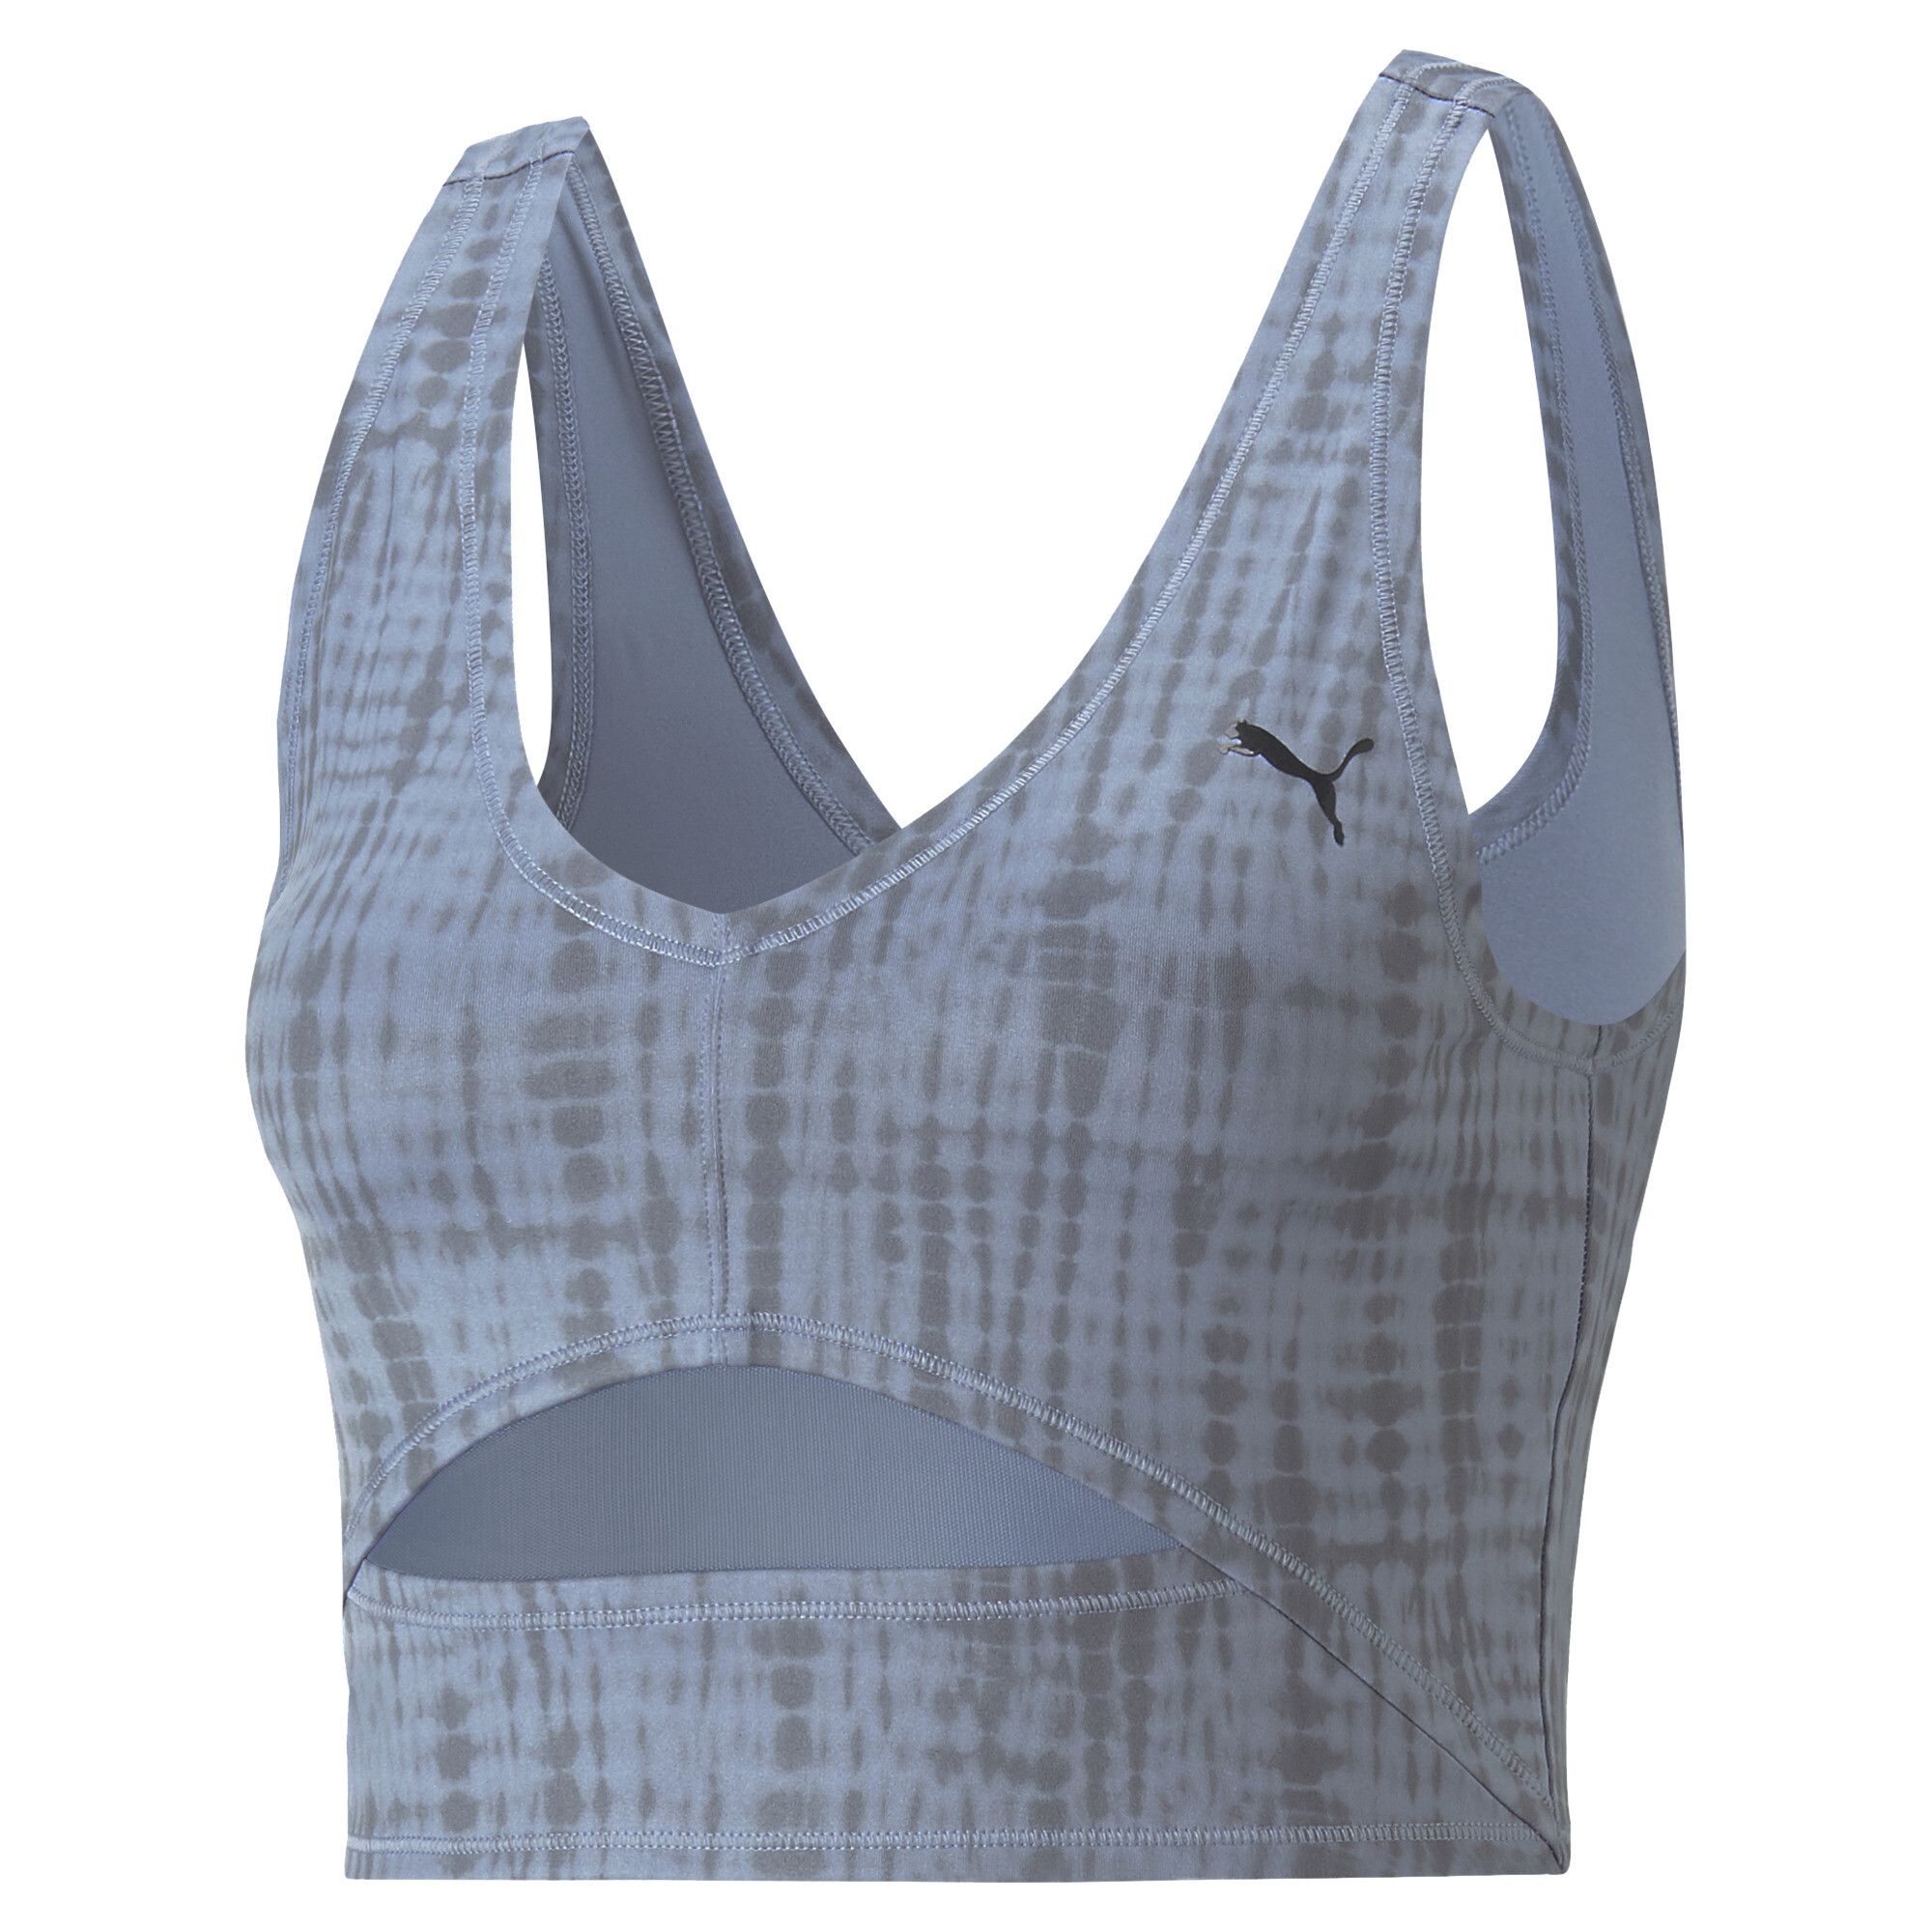 PRODUCT STORY Hit the yoga studio in the comfortable confines of this training top, which features a supportive fit, mesh keyholes for maximum air flow, and dryCELL moisture-wicking technology to keep you cool and comfortable as the action heats up. FEATURES & BENEFITS : dryCELL: Performance technology designed to wick moisture from the body and keep you free of sweat during exercise Recycled Content: Made with at least 70% recycled material as a step toward a better future DETAILS : Tight fit Keyhole detail with powermesh on front All-over graphic print PUMA Cat Logo on left chest